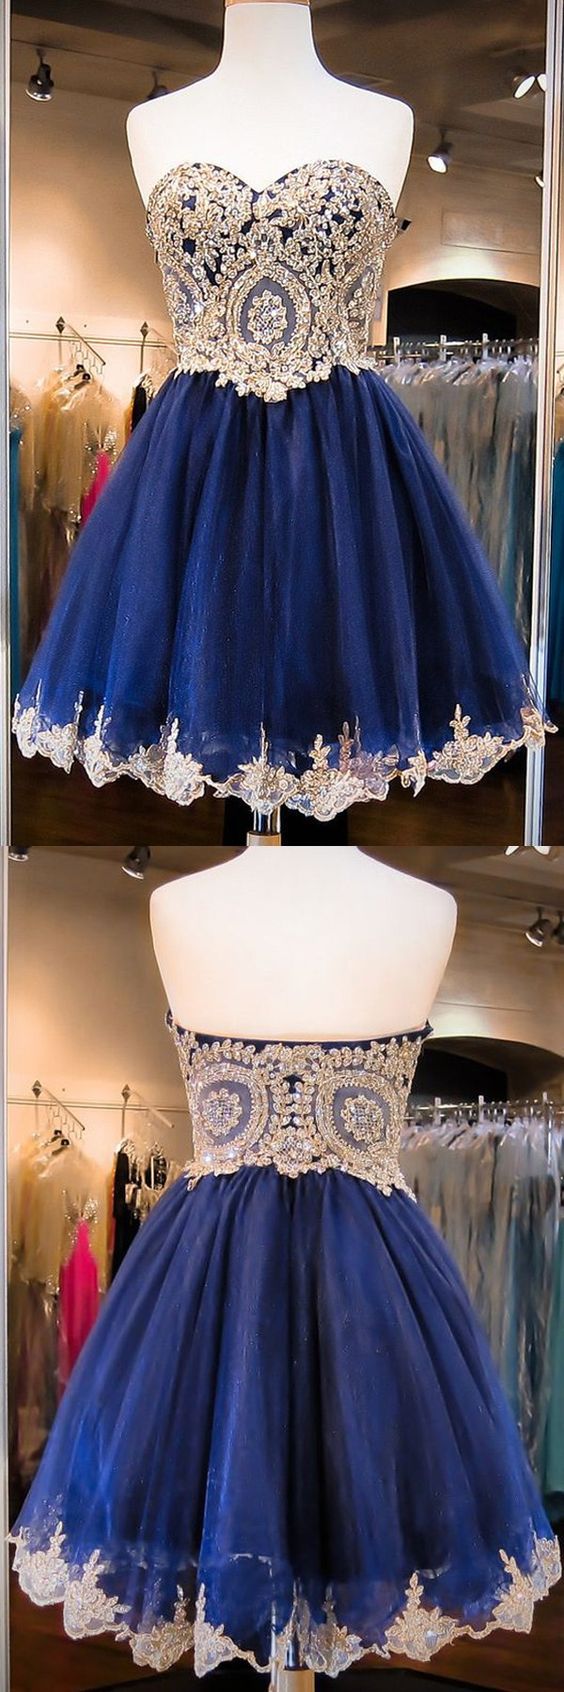 Sparkle Sweetheart Short Royal Blue Homecoming Party Dress